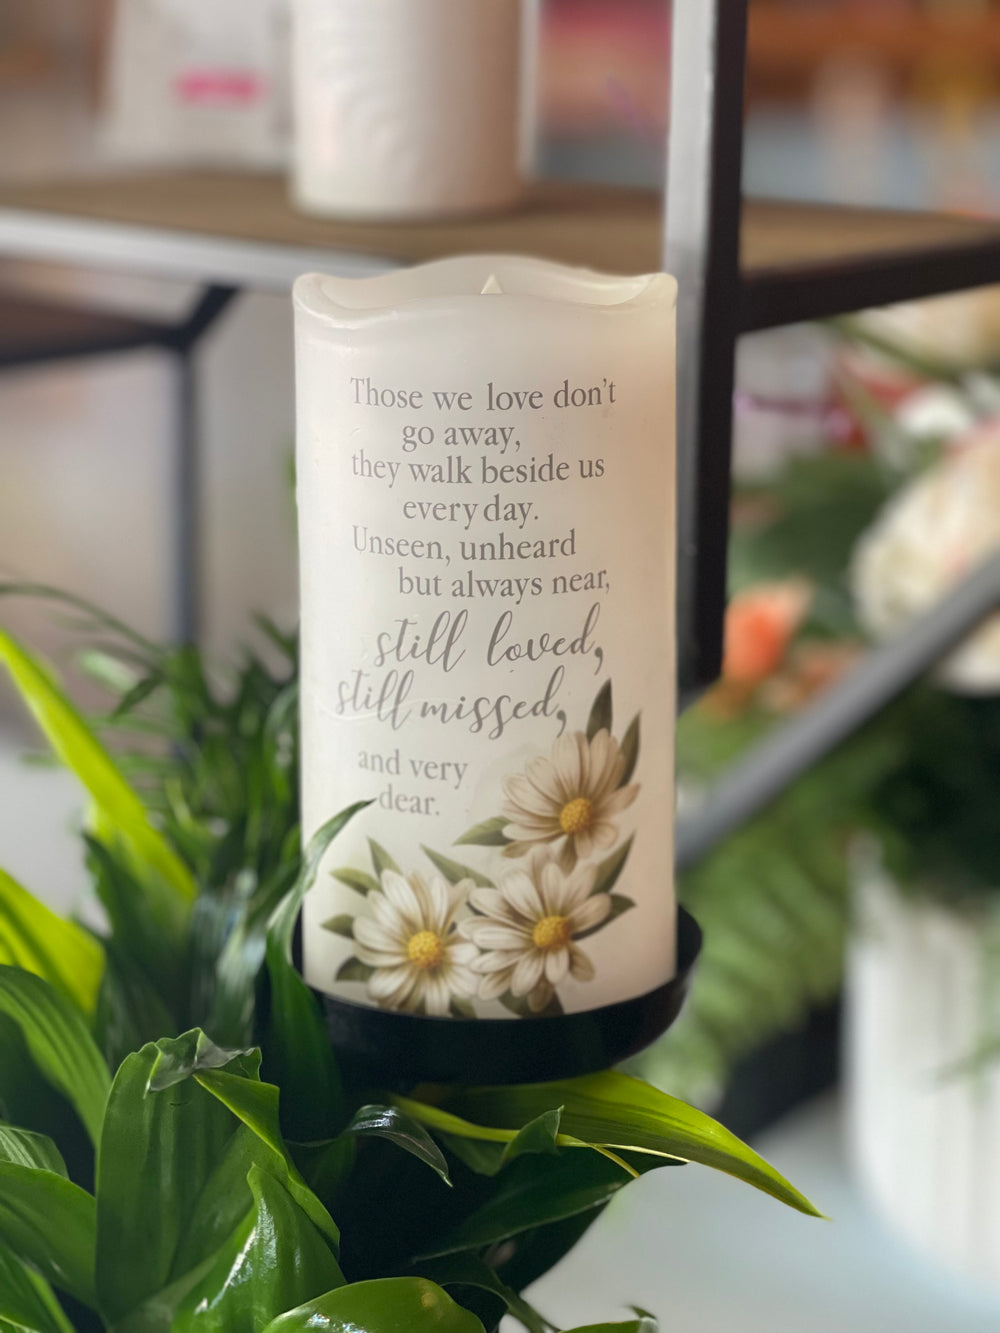 Those We Love Don't Go Away Candle - Village Floral Designs and Gifts